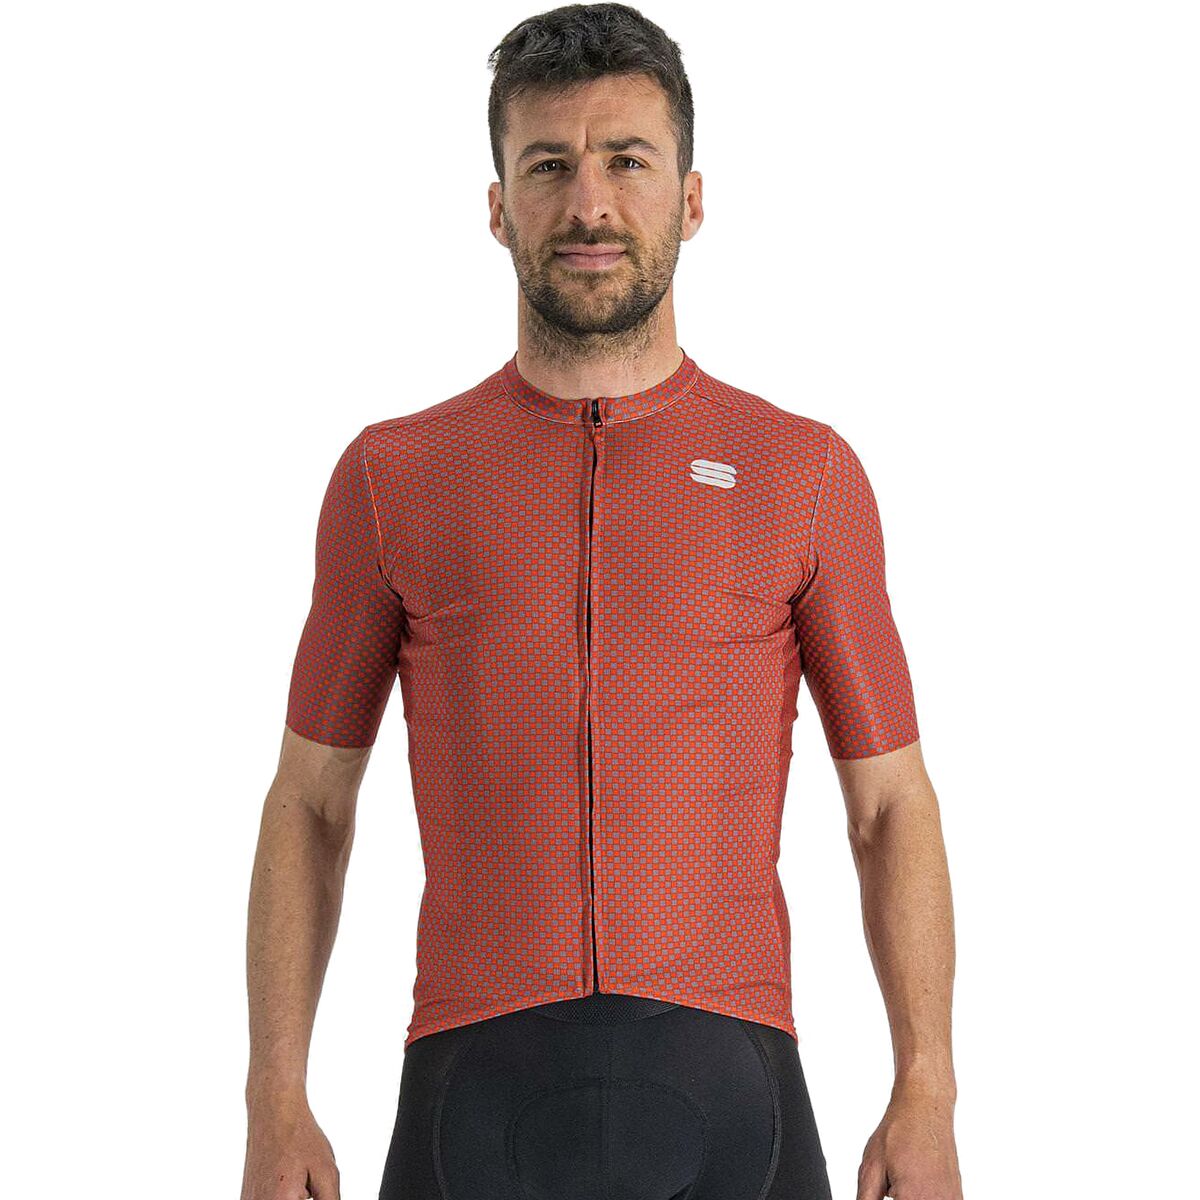 Sportful Checkmate Jersey - Men's